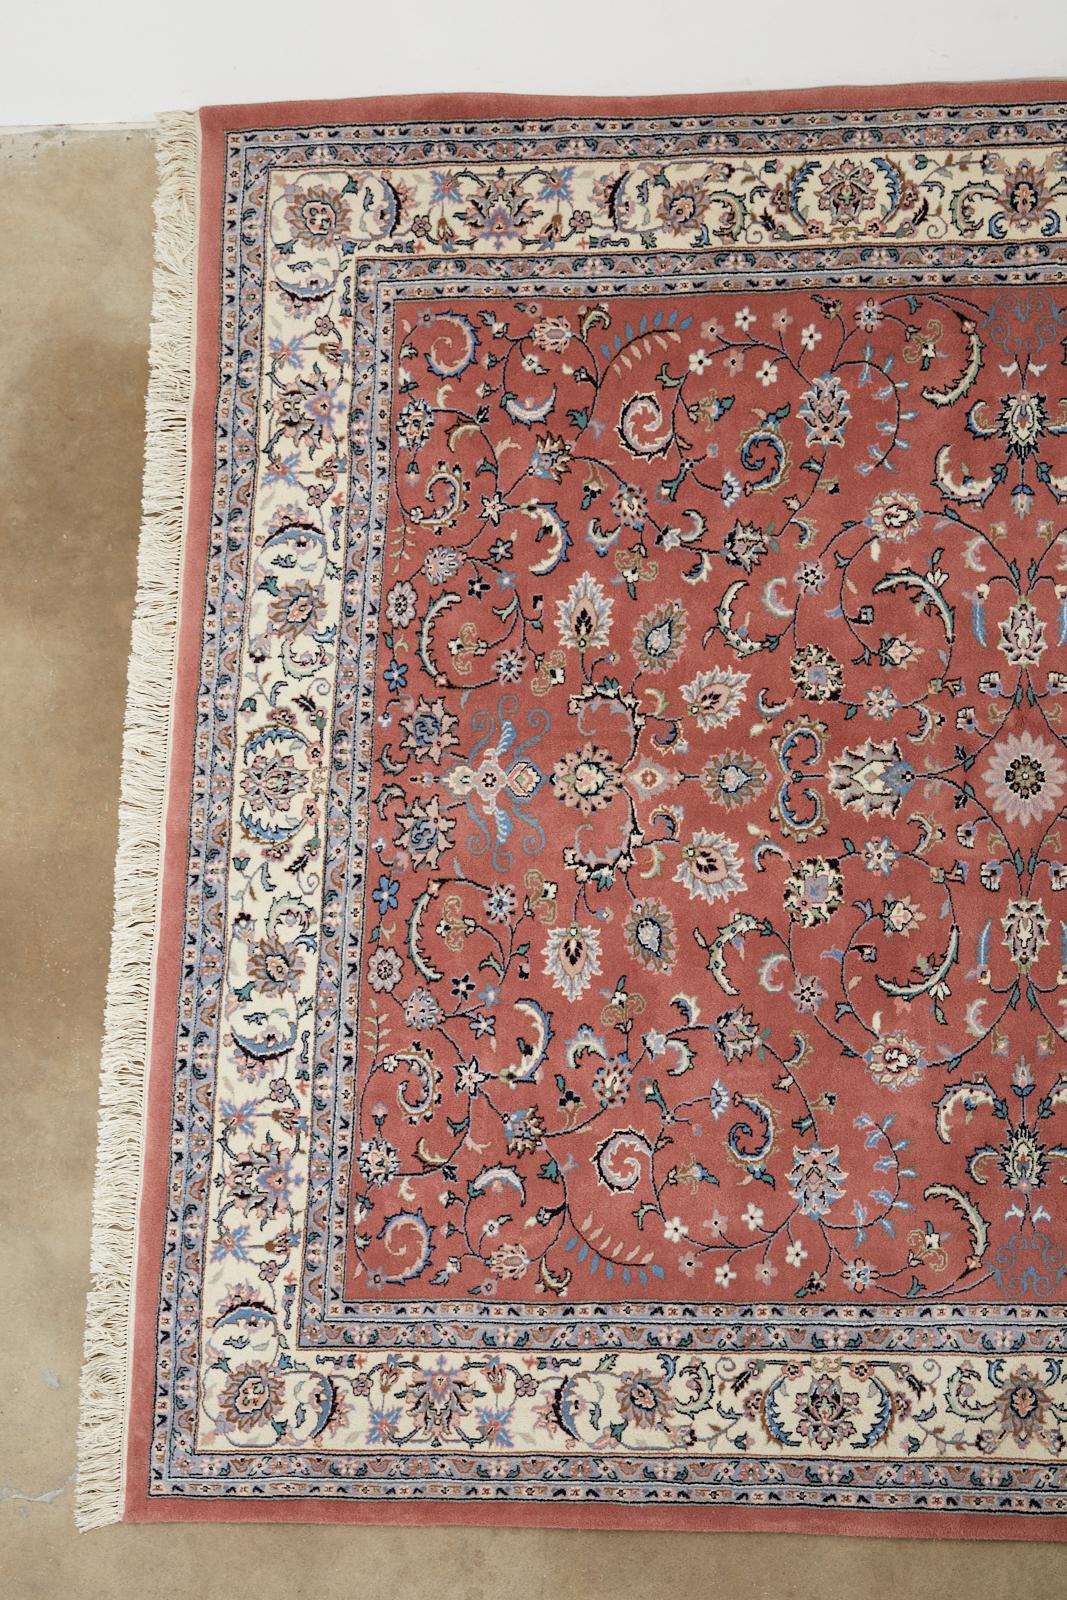 Fine Indo Persian Kashan style hand knotted wool rug featuring a colorful unique raspberry field. The carpet is decorated with Classic, floral vine motifs and palmettes. Lovely open design pattern that allows the vivid colors to stand out boldly.